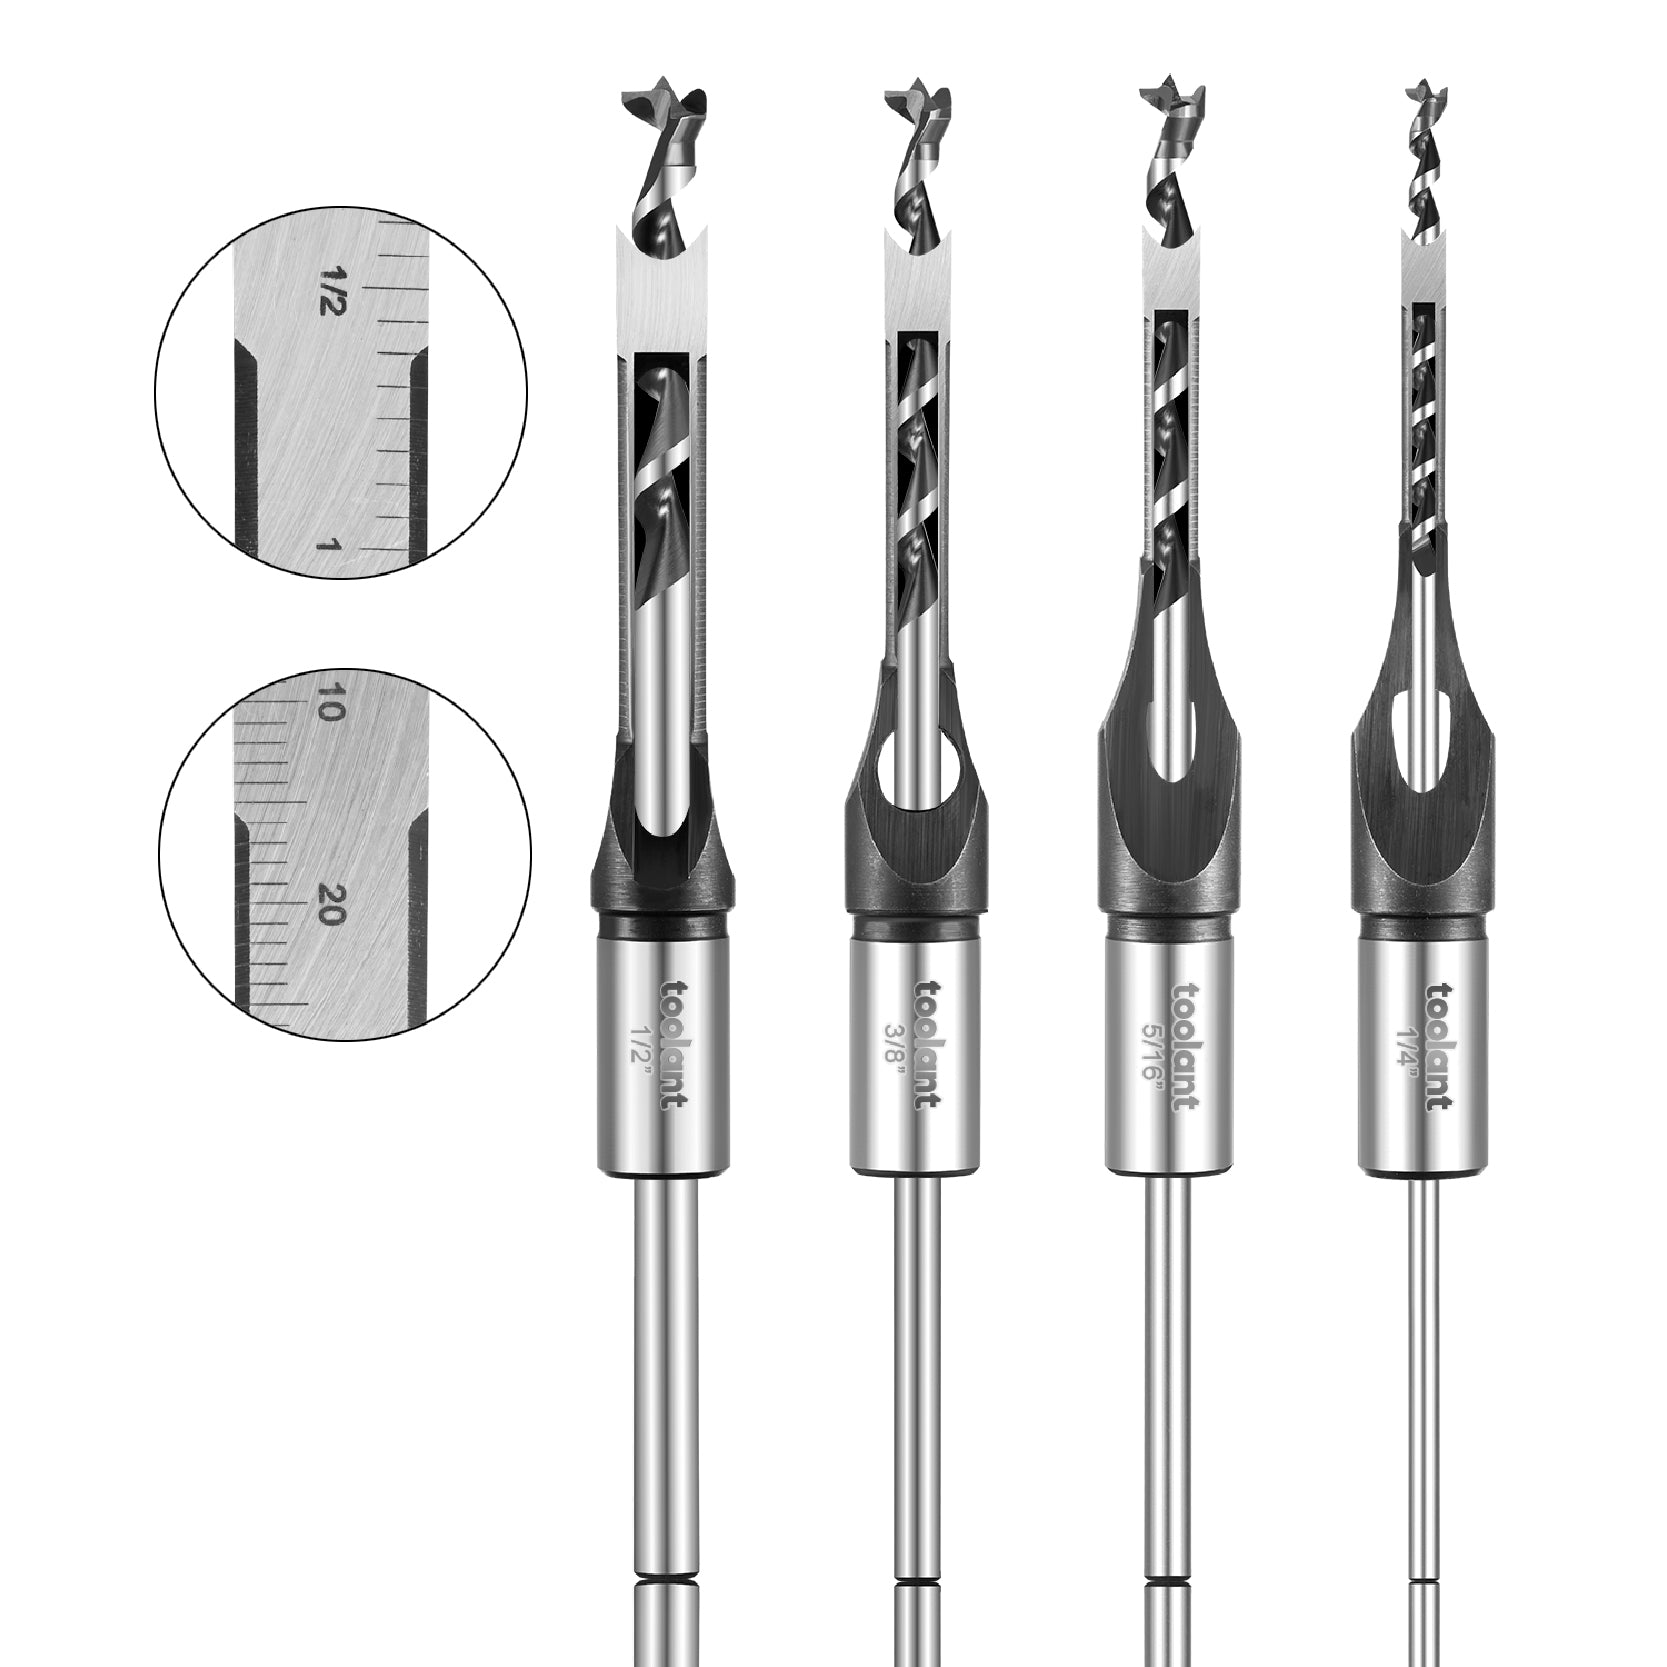 moobody 6pcs Hole Drill Bit Woodworking Hole Saw Mortising Chisel Steel  Drill Bits Set 1/4 inch, 5/16 inch, 3/8 inch, 1/2 inch, 9/16 inch, 5/8 inch